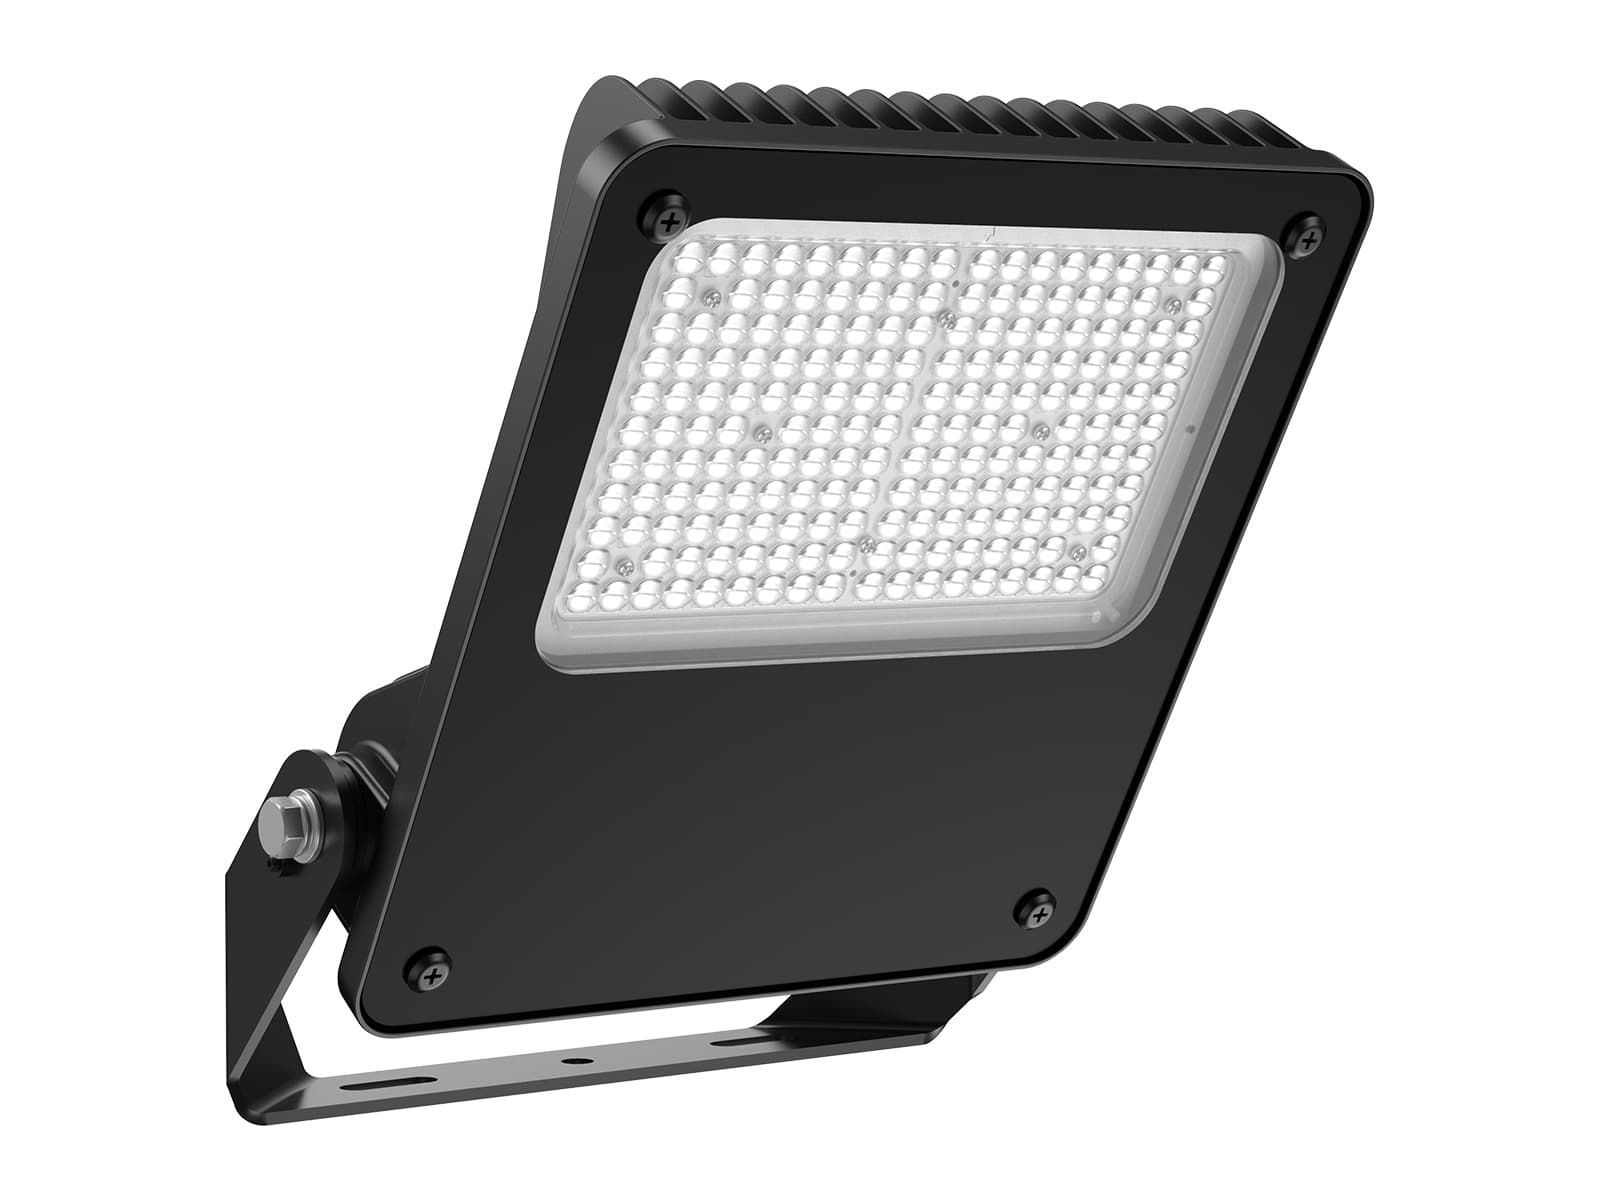 FL44 LED Flood Light with with external vent avoid internal fogging and frosting